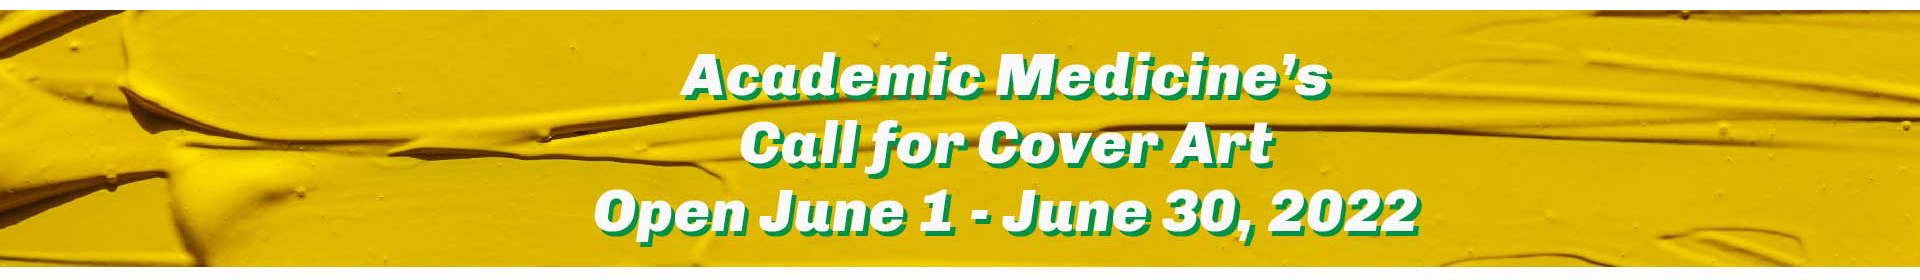 Academic Medicine Cover Art Call Event Banner